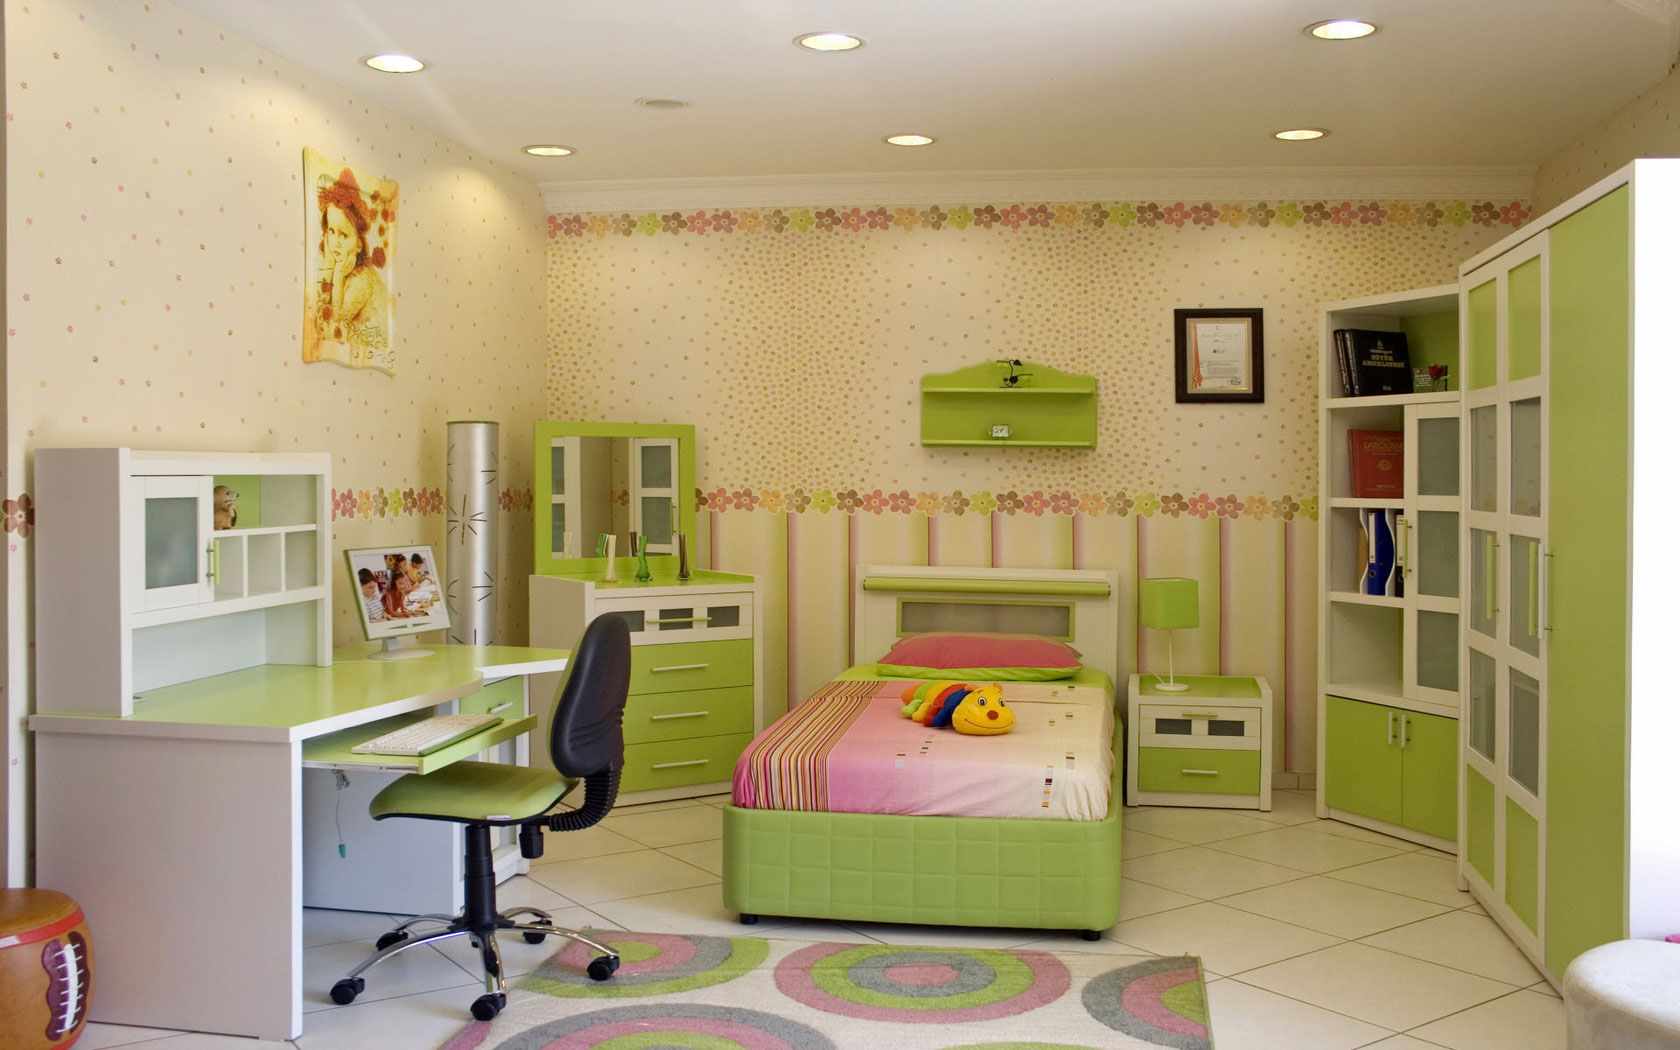 variant of the unusual interior of the children's room